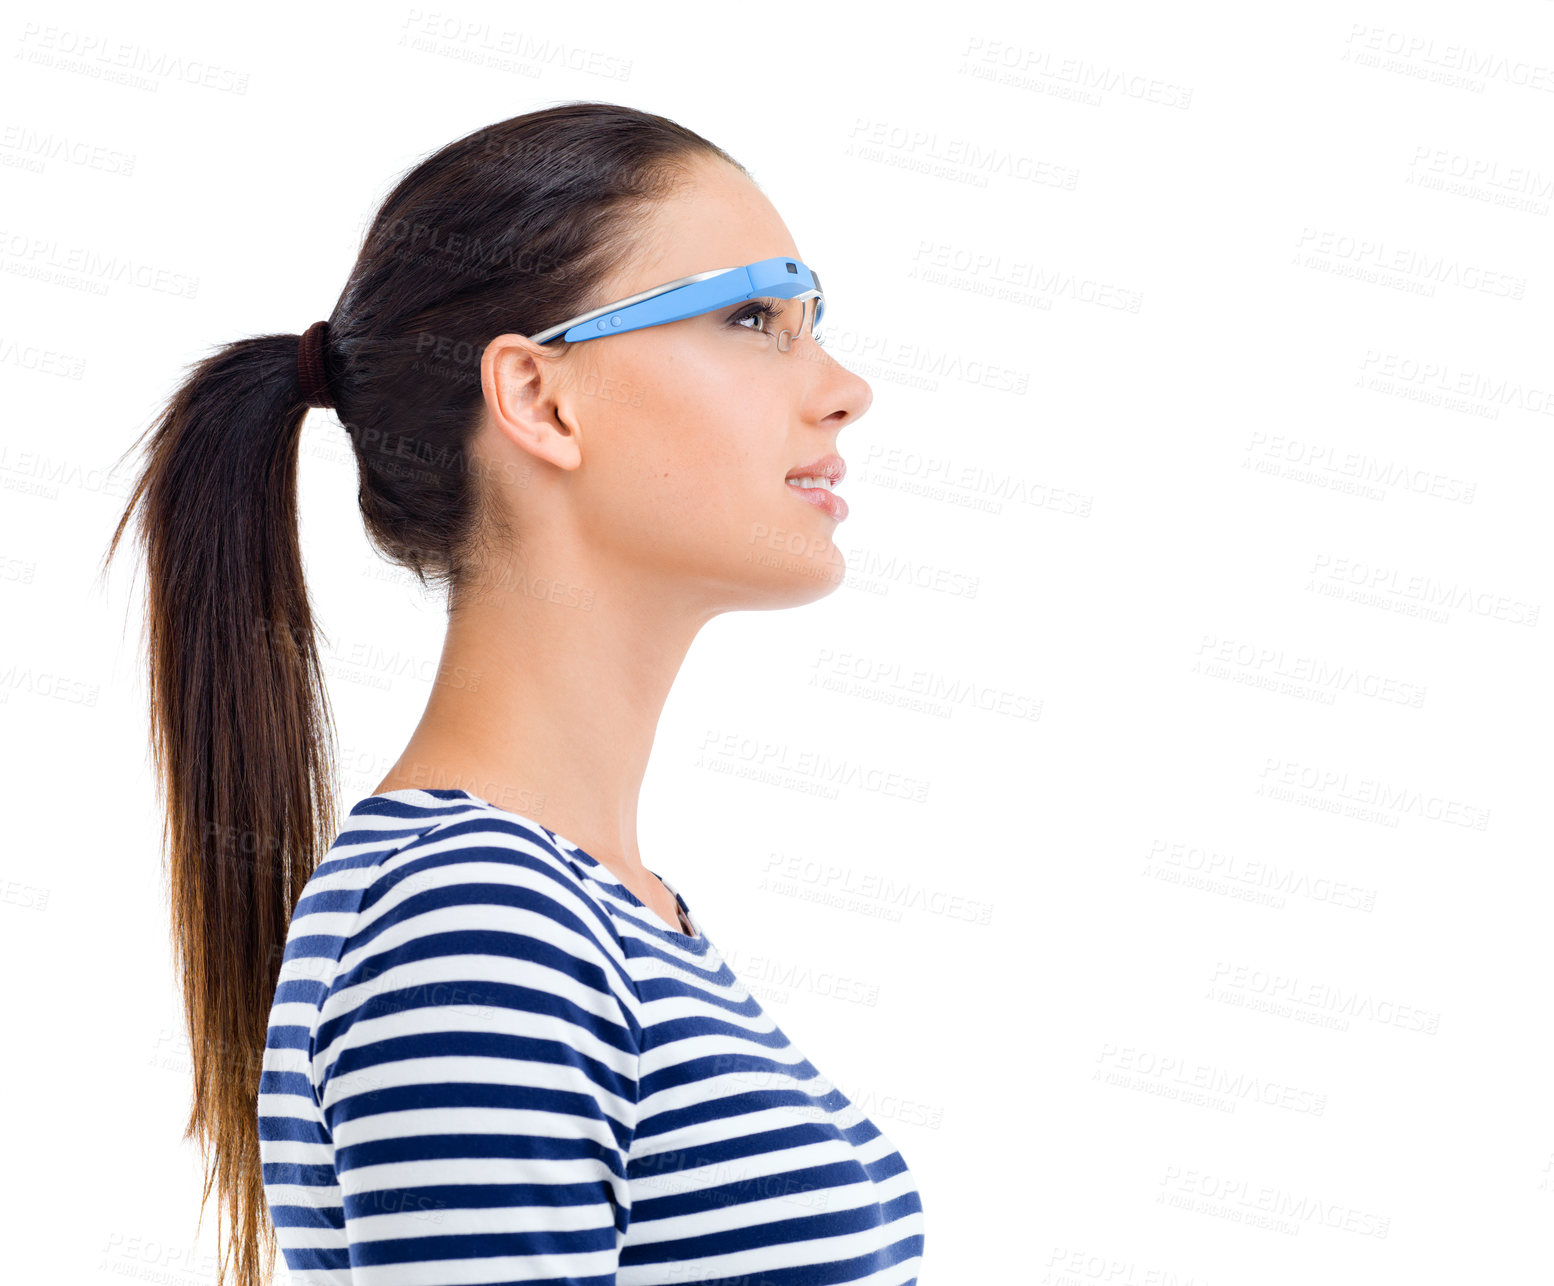 Buy stock photo Studio shot of an attractive young woman using smartglasses against a white background